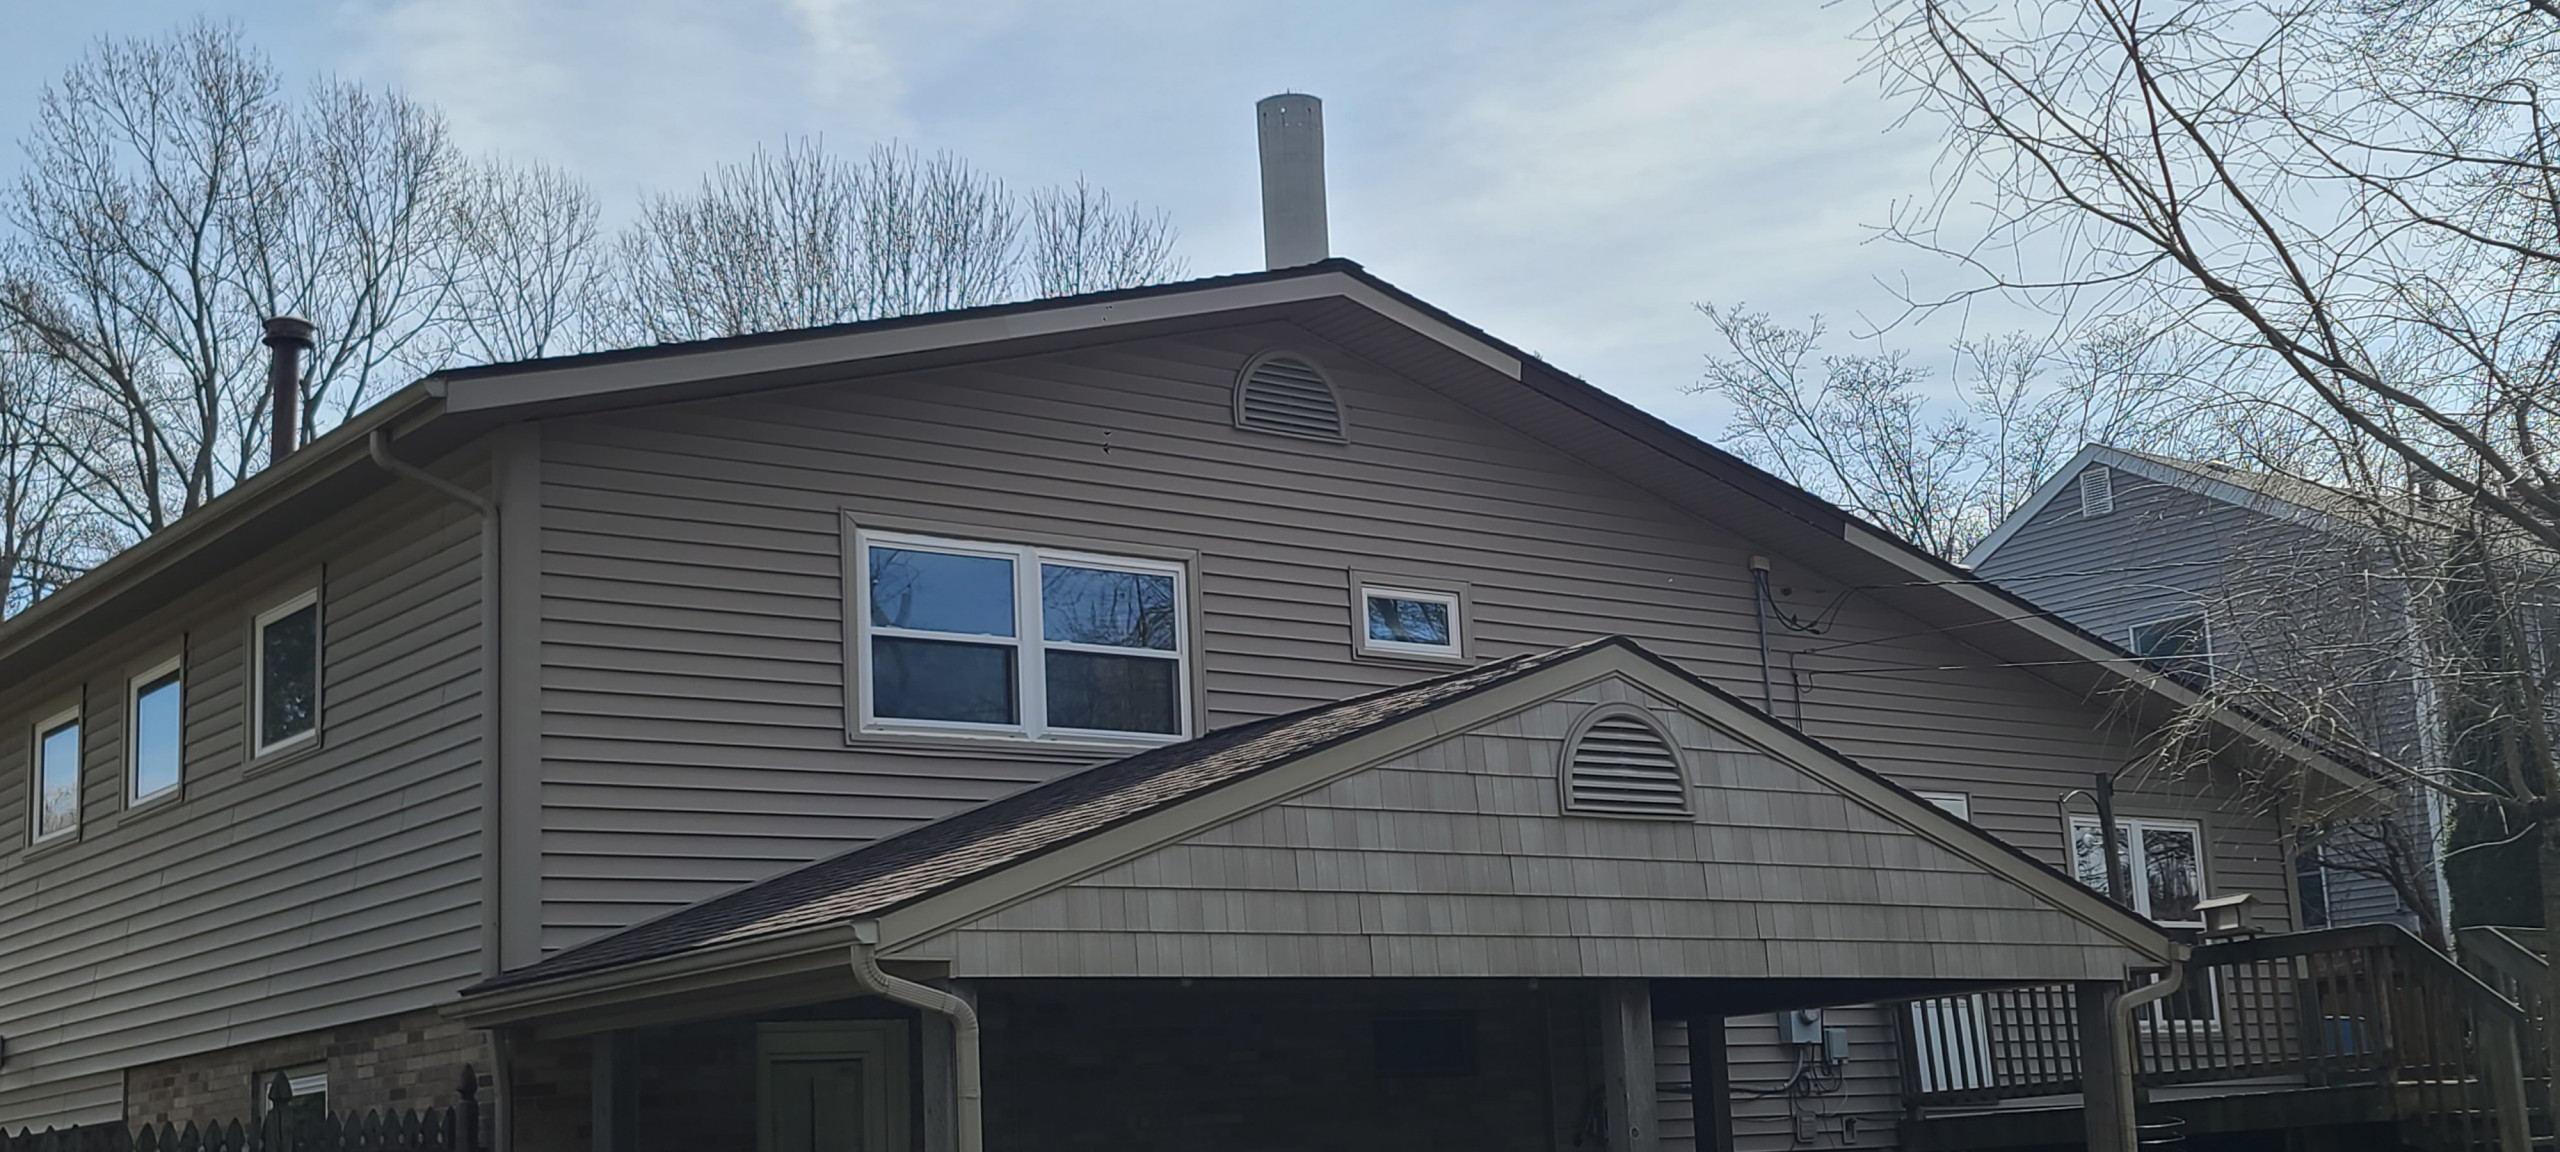 Wind Damage to Siding and Other Exterior Features